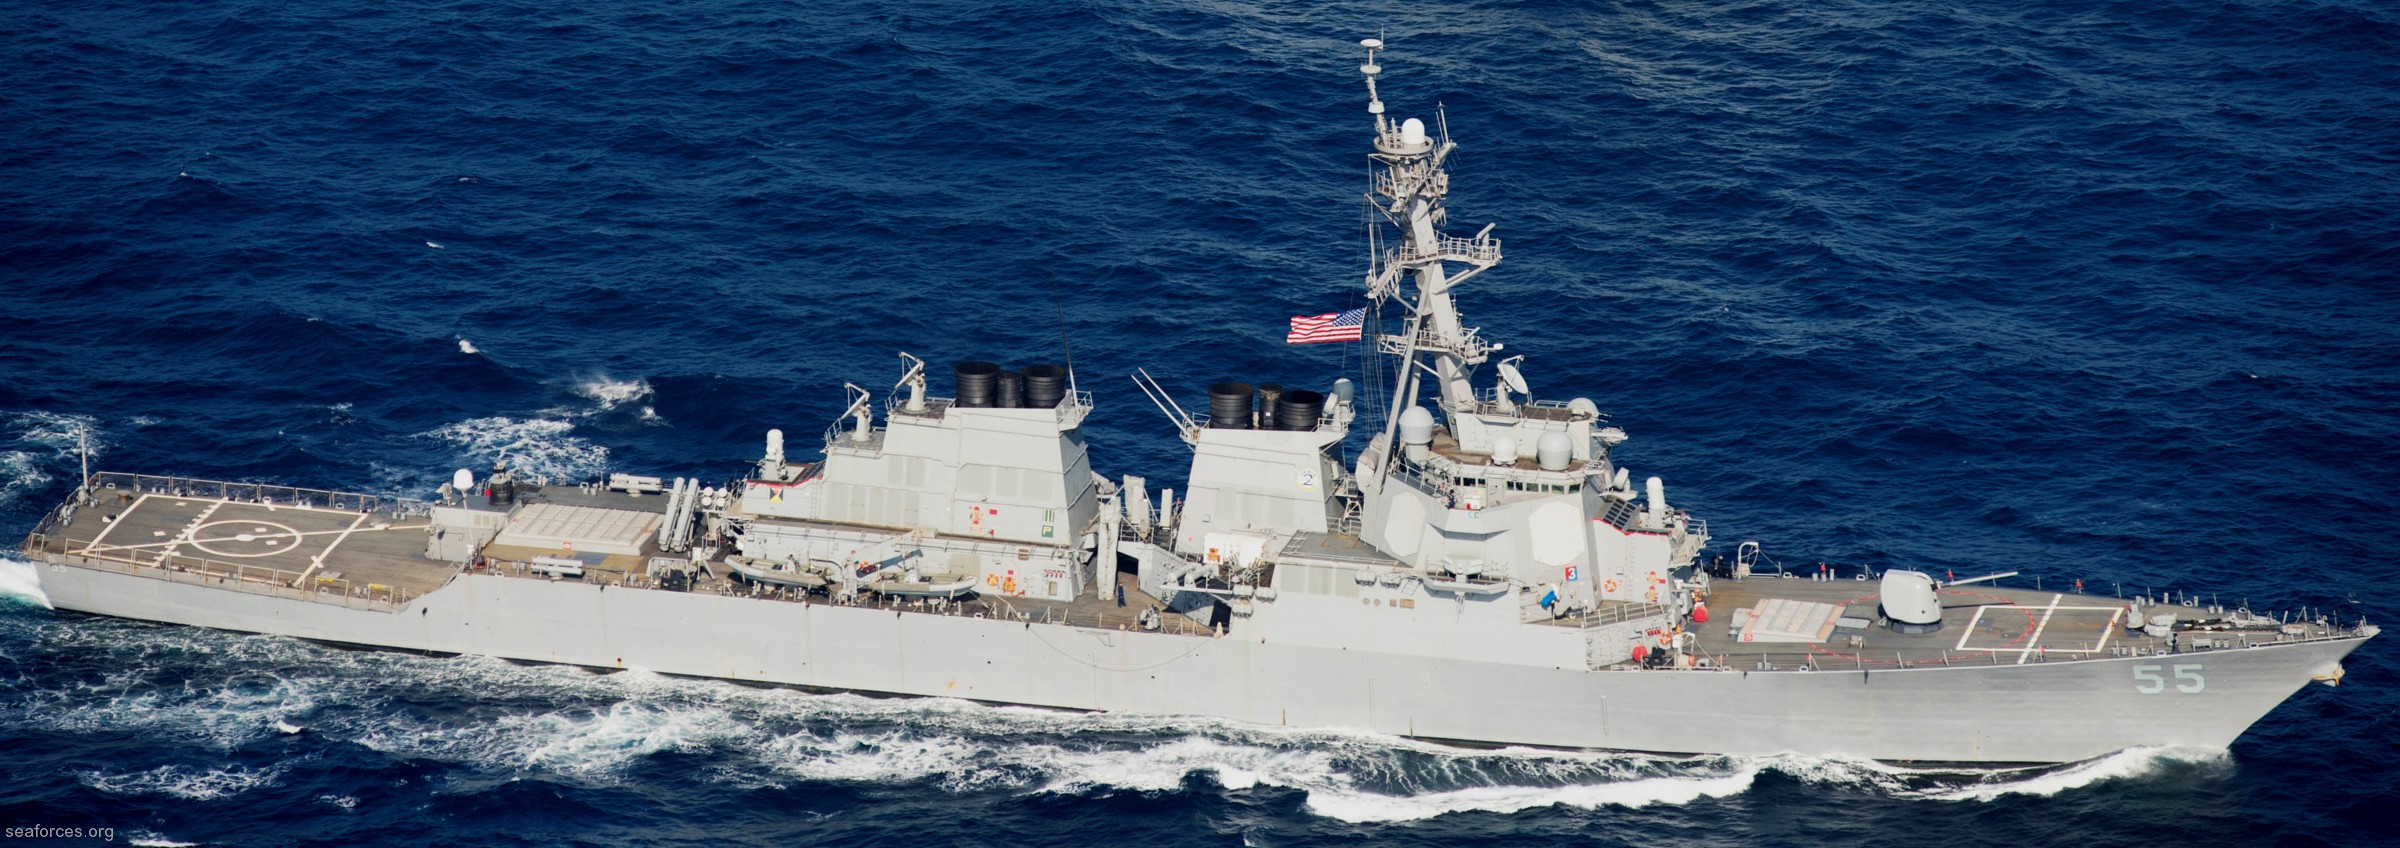 ddg-55 uss stout guided missile destroyer us navy 38